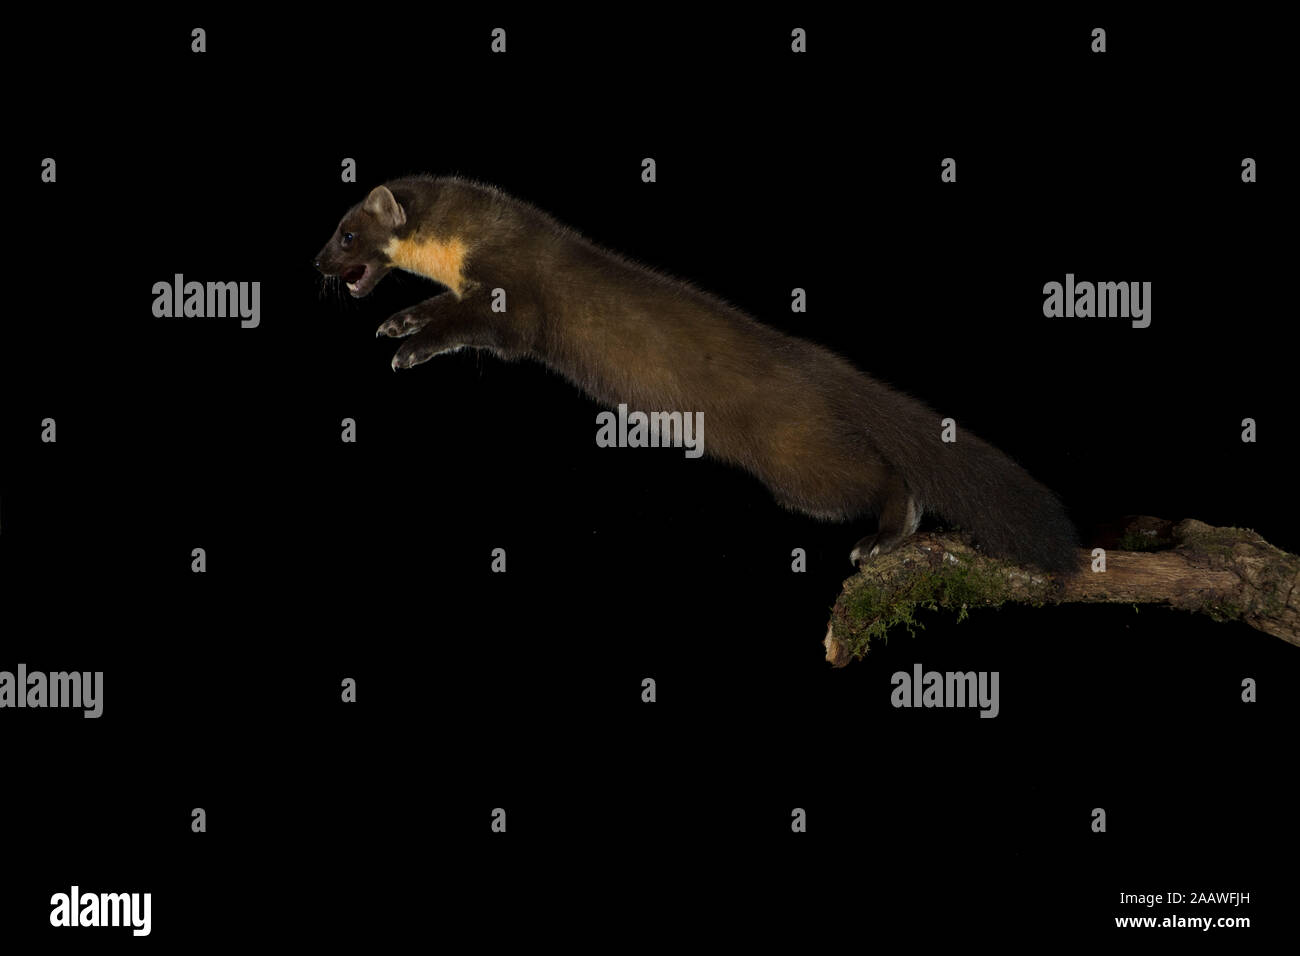 Pine marten, Martes martes, aggressive, jumping from branch at night Stock Photo